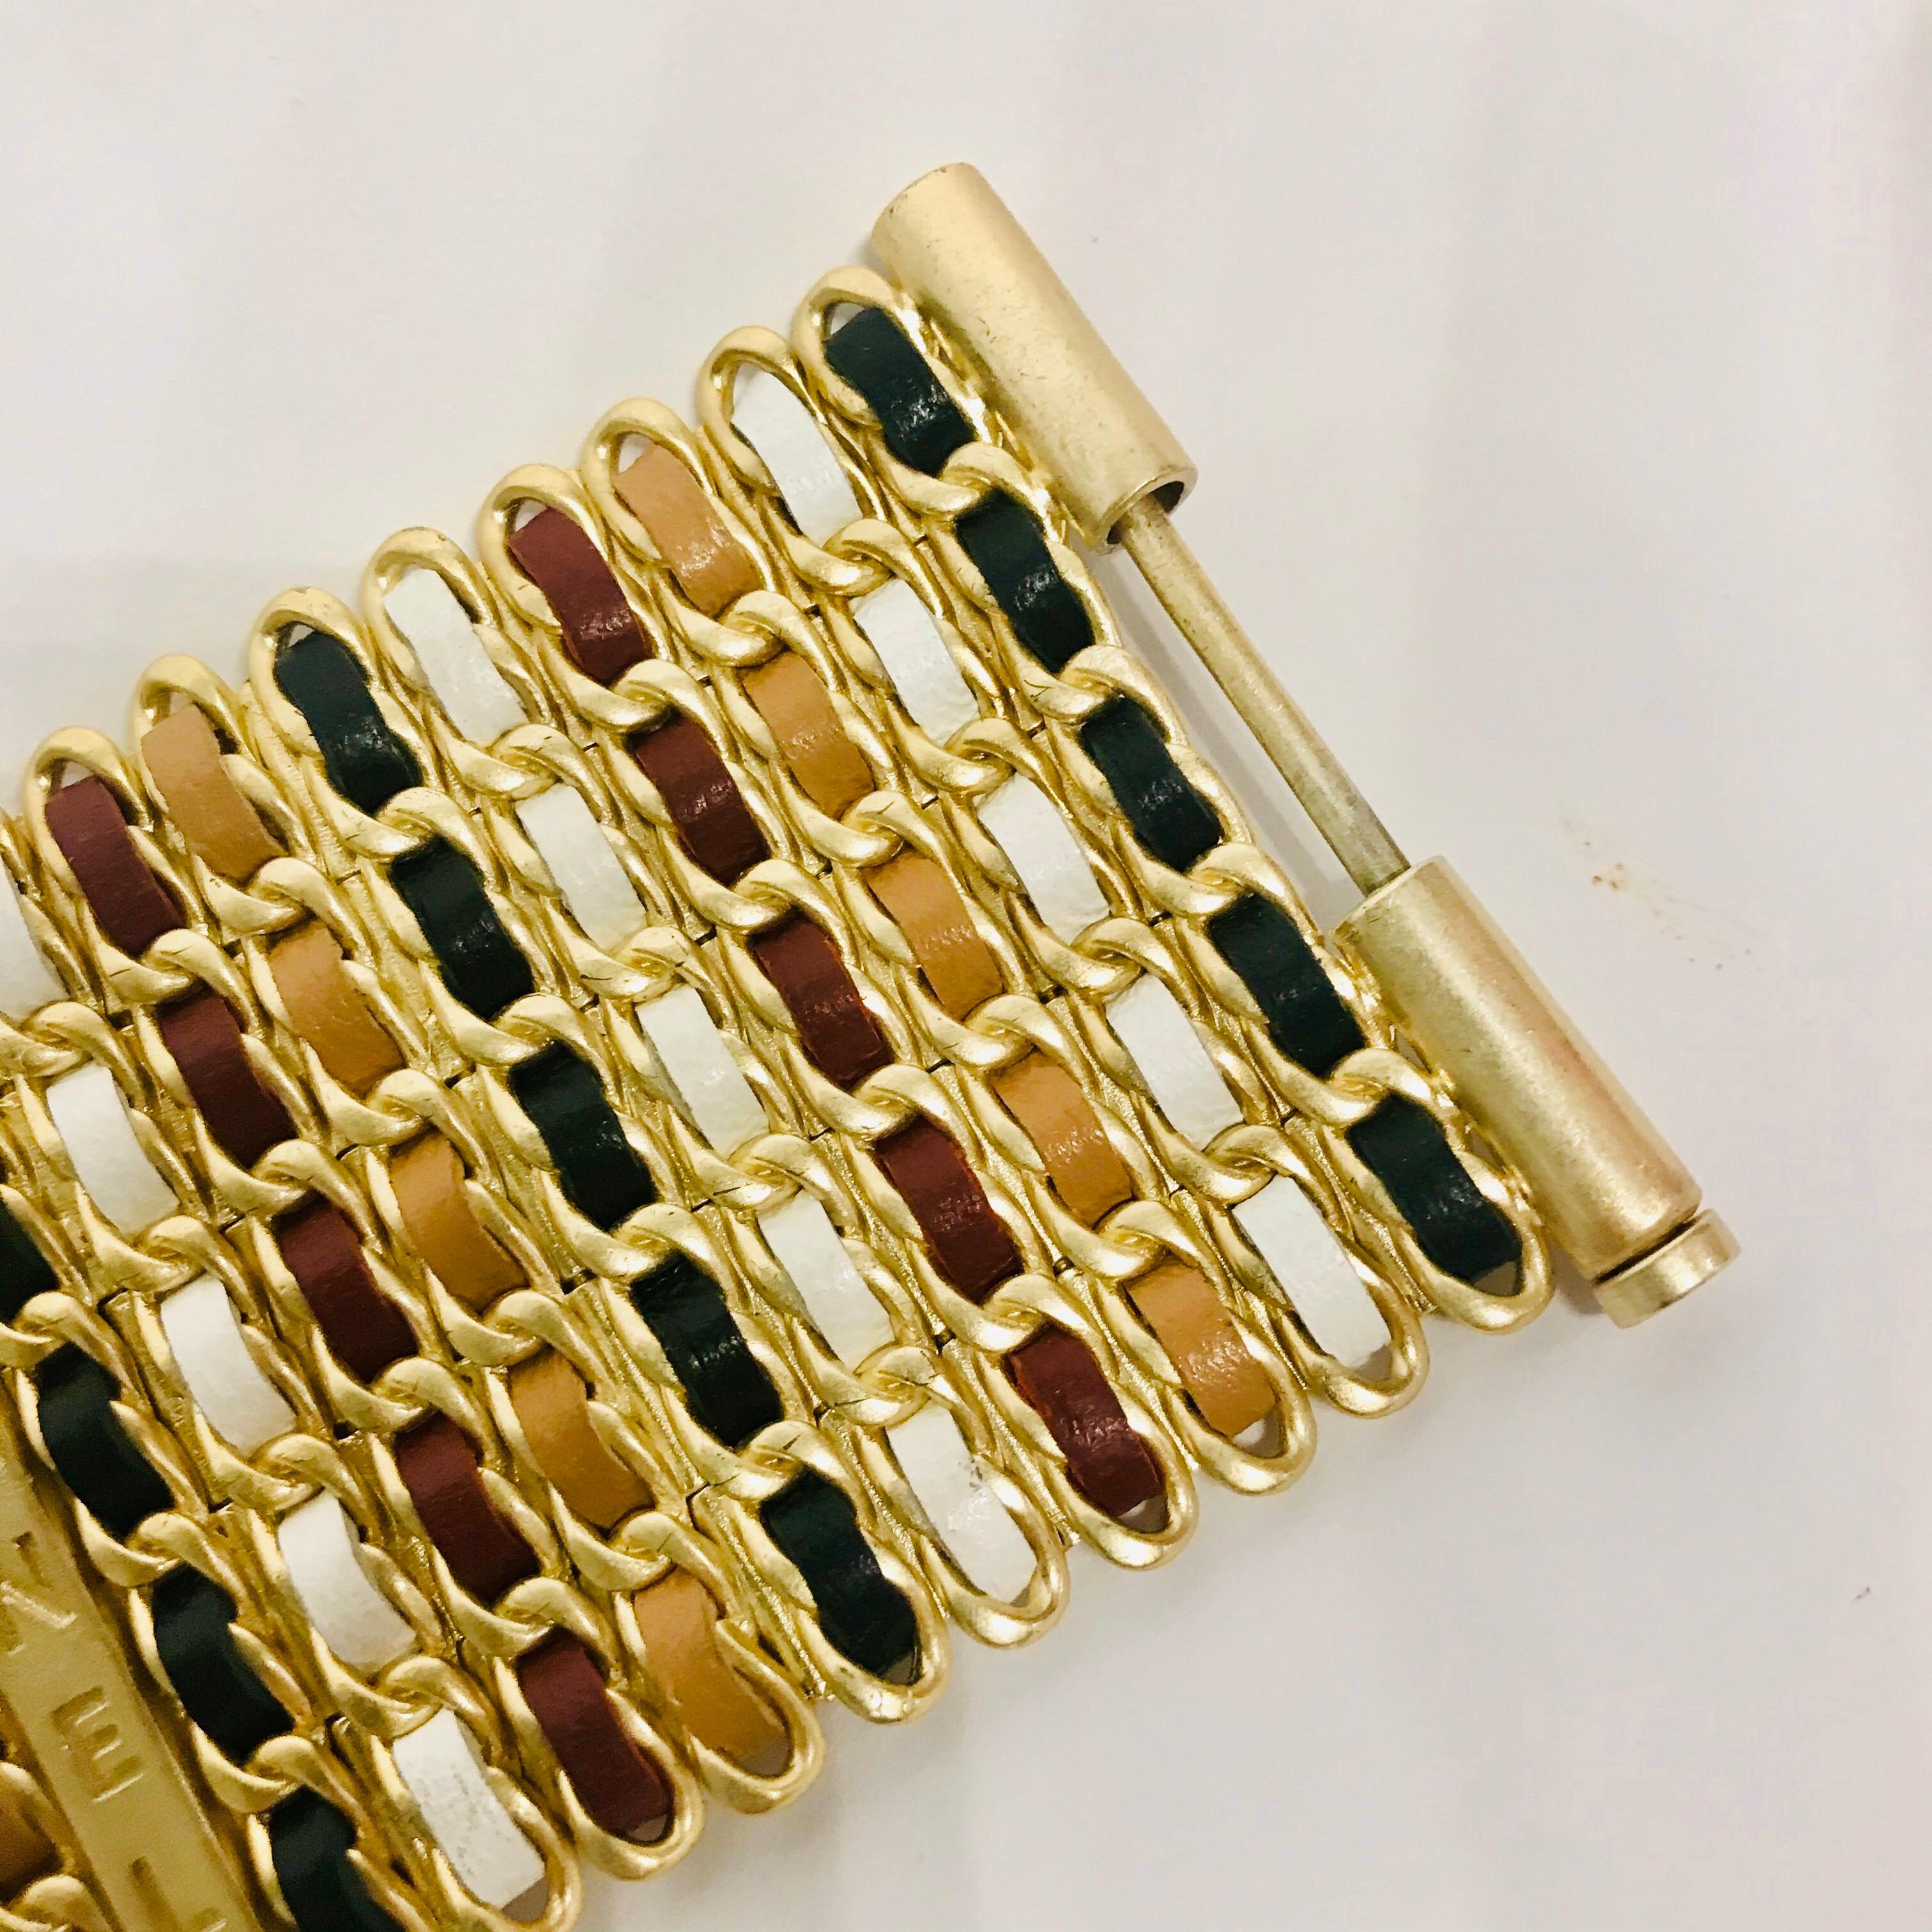 A beautiful wide bracelet from Chanel 2019 cruise collection. Iconic use of leather strips in black, camel and burgundy colors woven in the gold tone metal chain style links. Two long spacer bars inscribed CHANEL to give contrast to the leather work